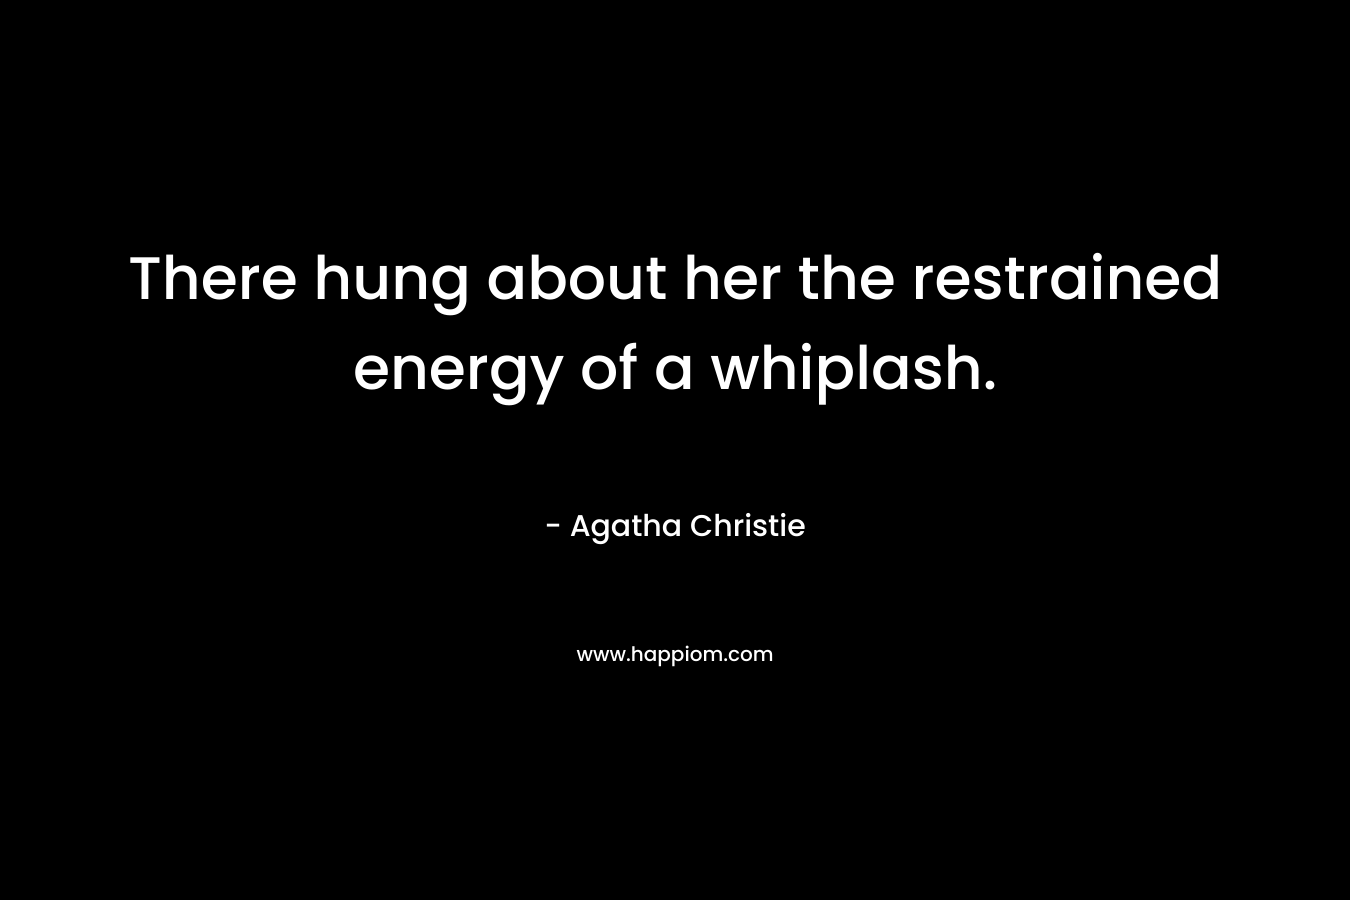 There hung about her the restrained energy of a whiplash. – Agatha Christie